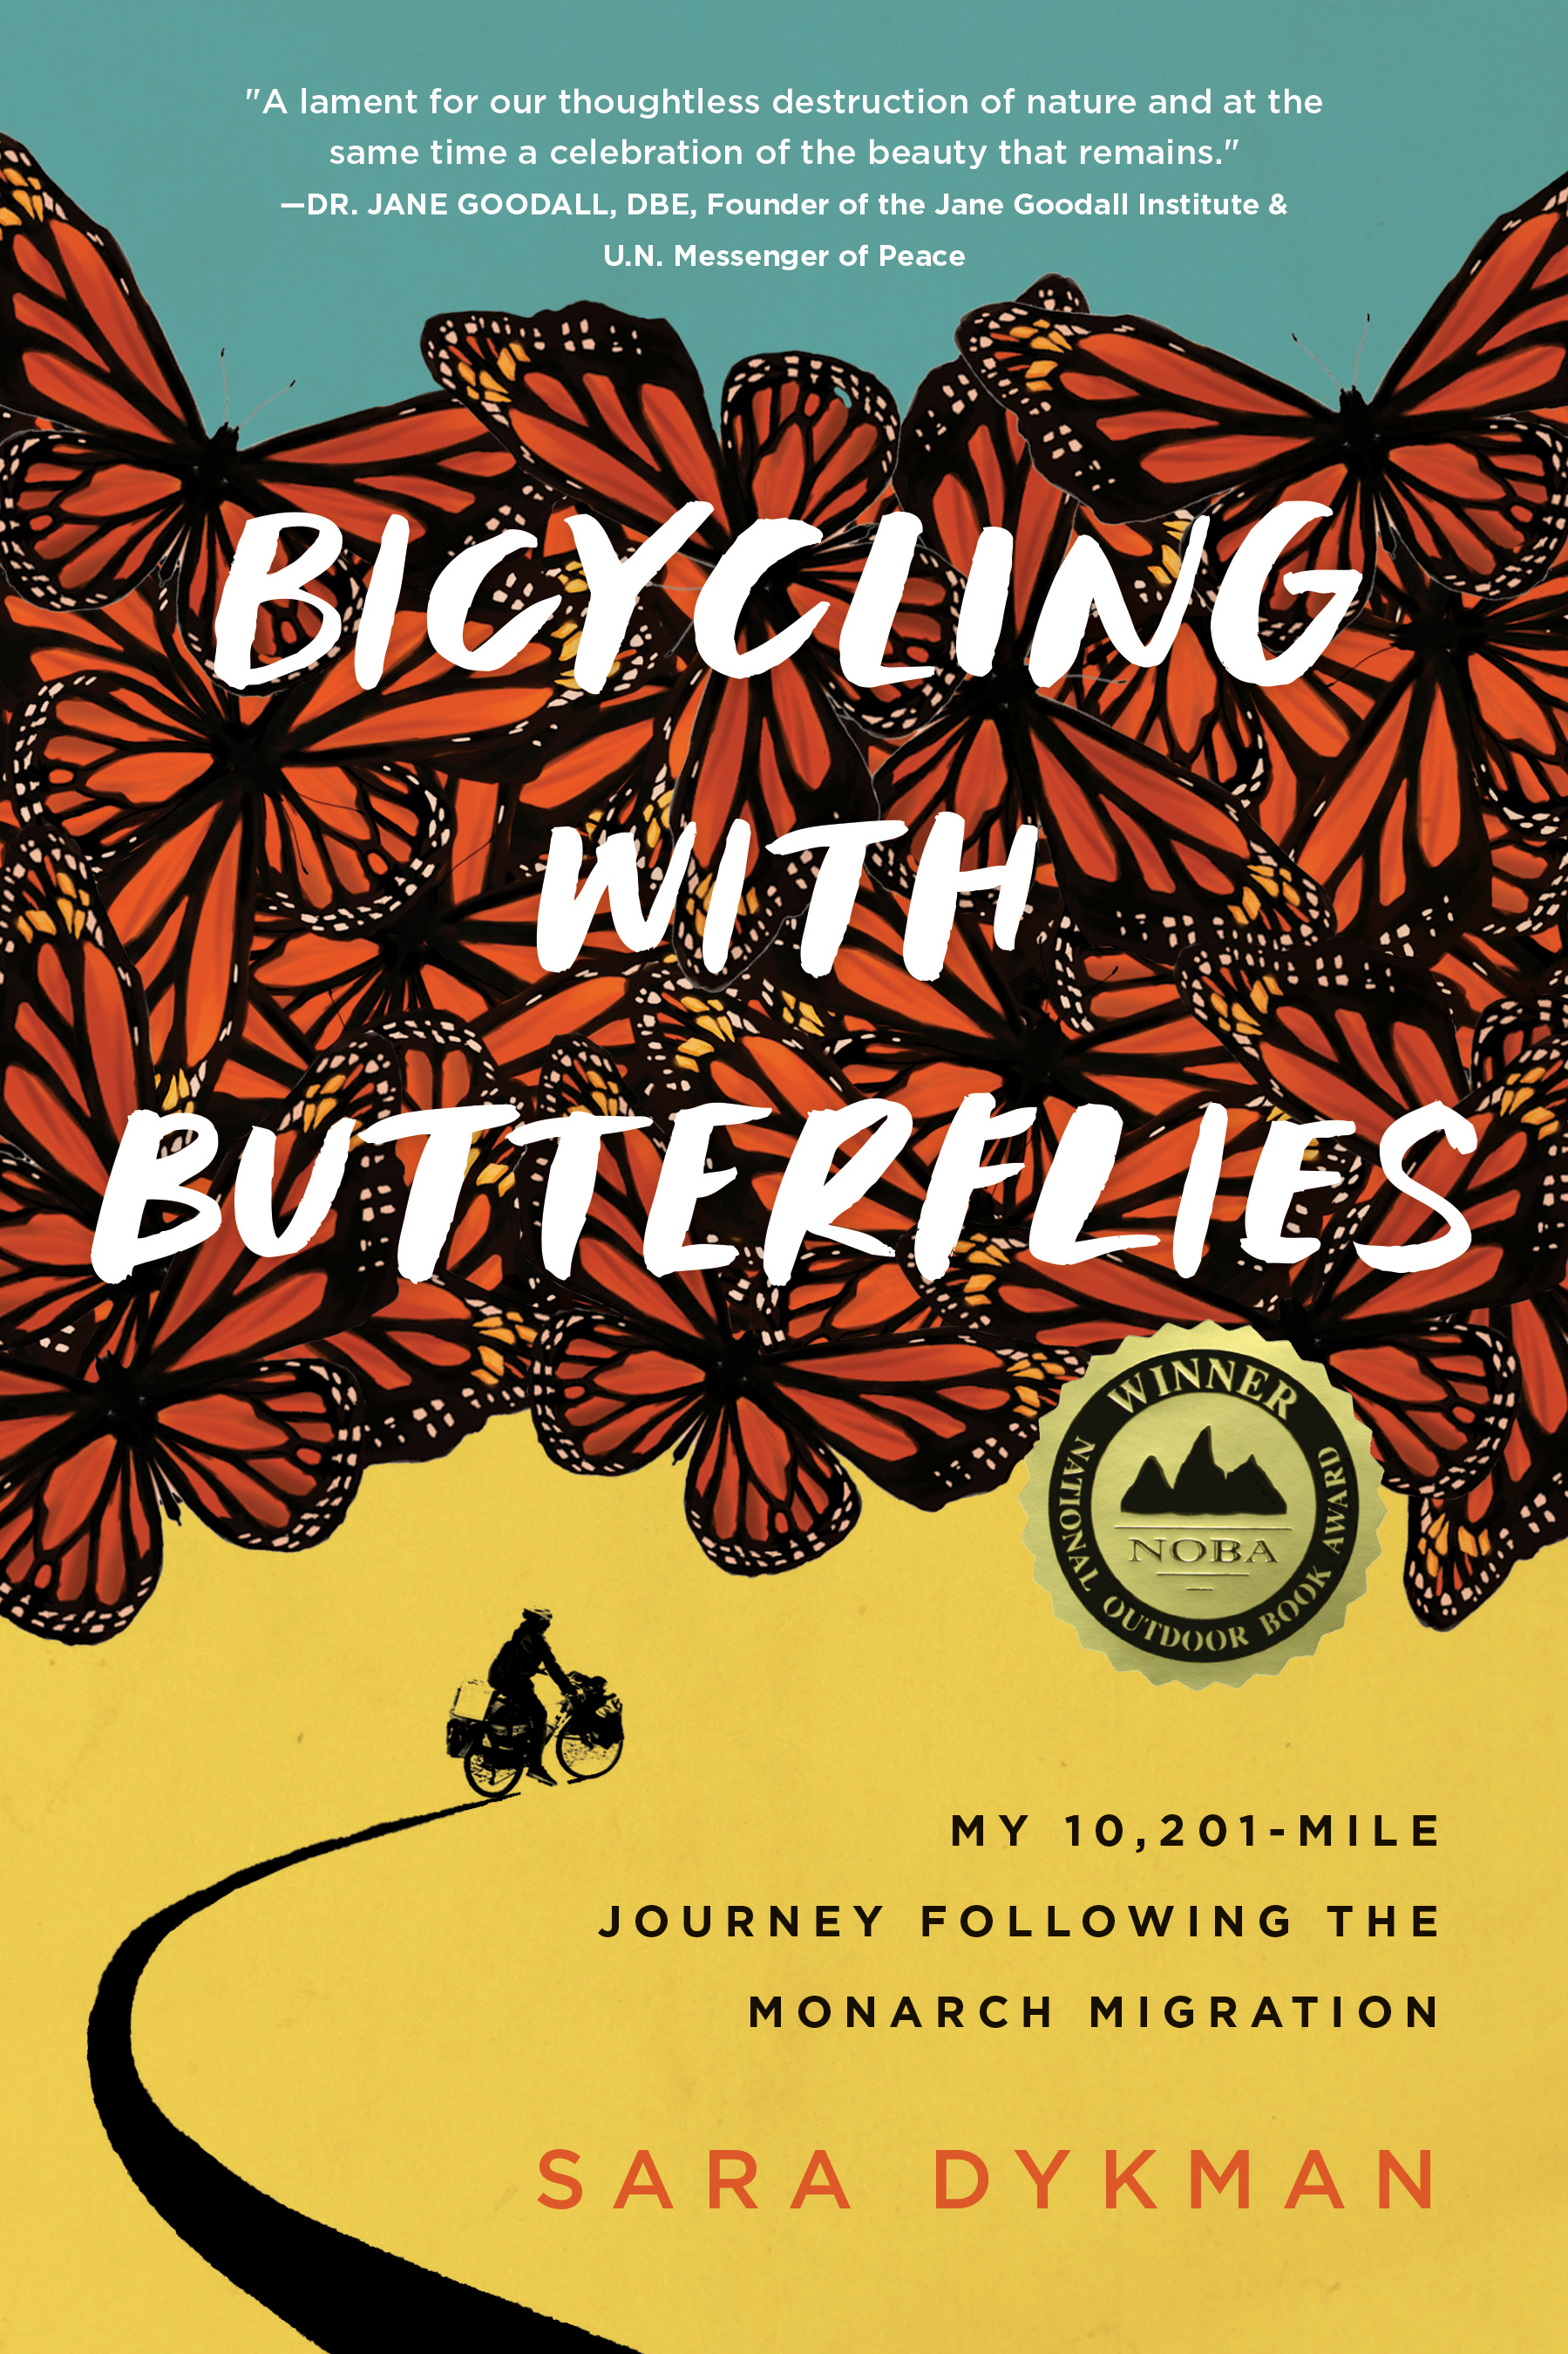 Bicycling with Butterflies by Sara Dykman Hachette Book Group